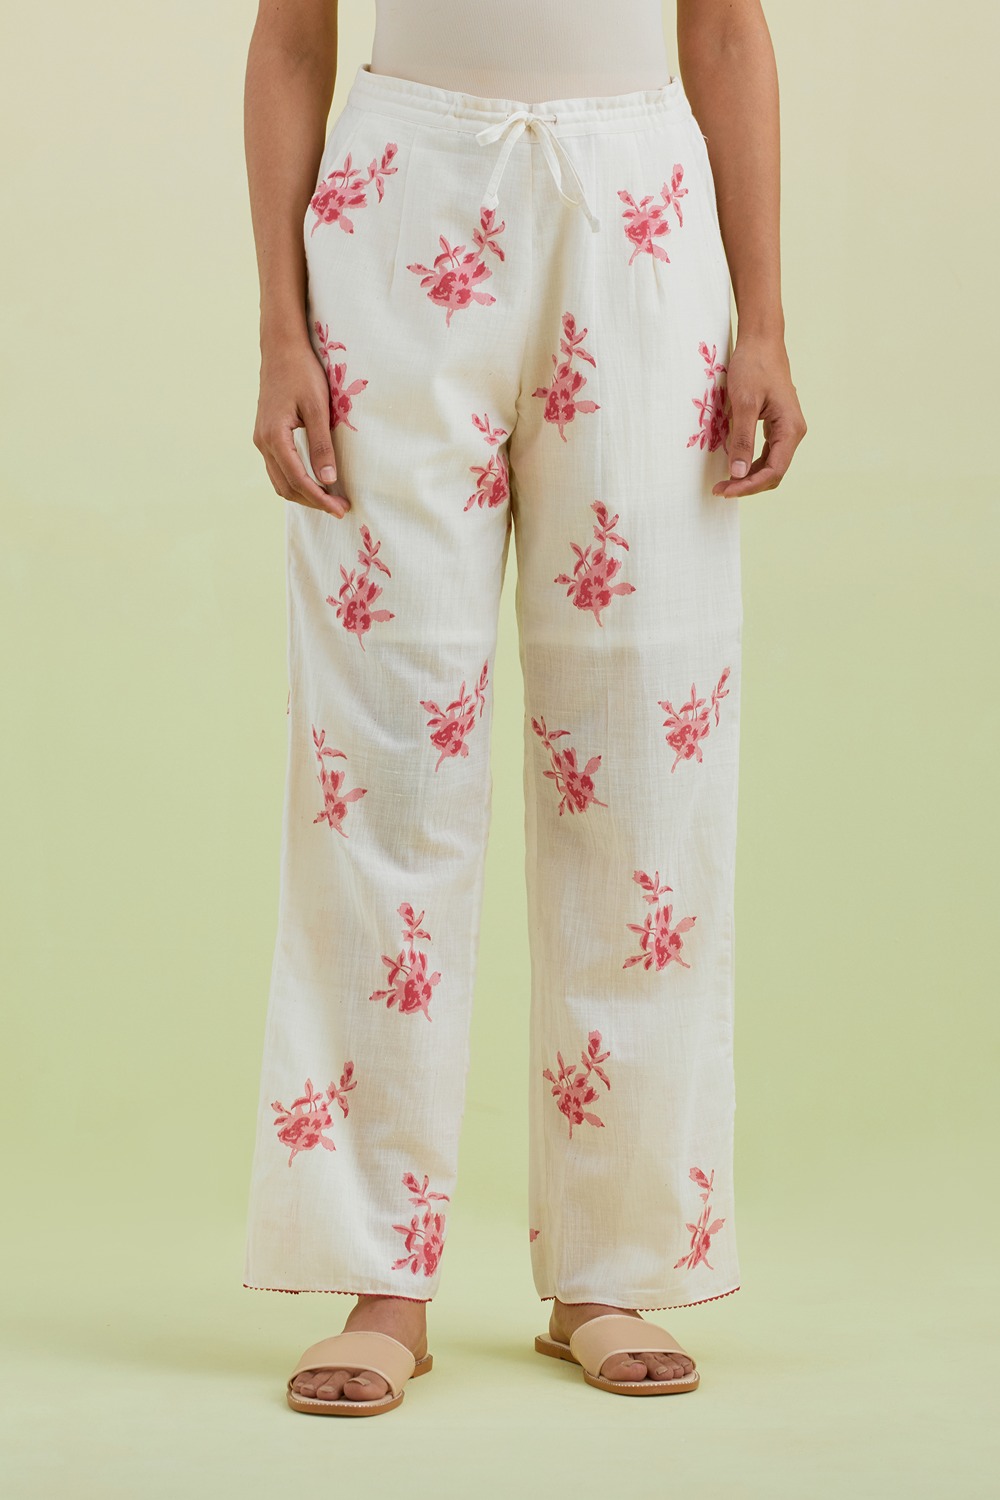 Off White Straight Pants With All-Over Pink Colored Floral Boota Hand-Block Print